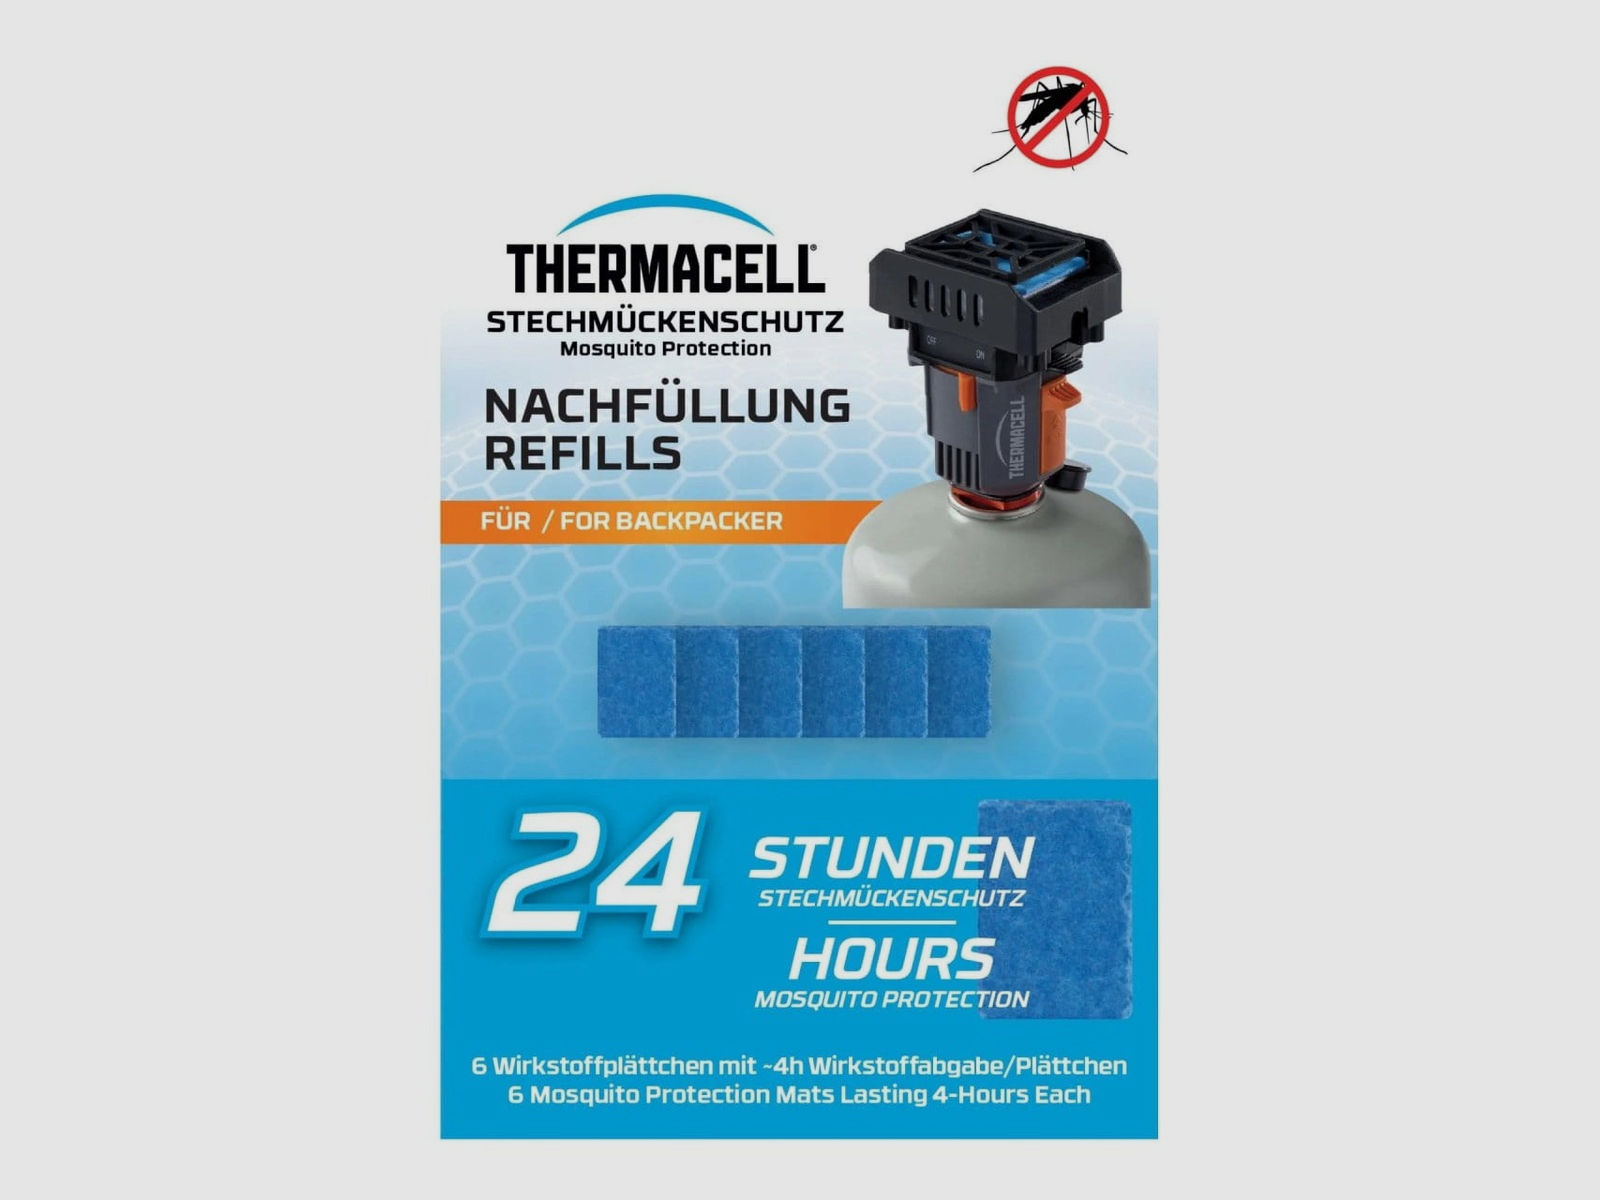 Thermacell M-24 Nachfüllpack Backpacker